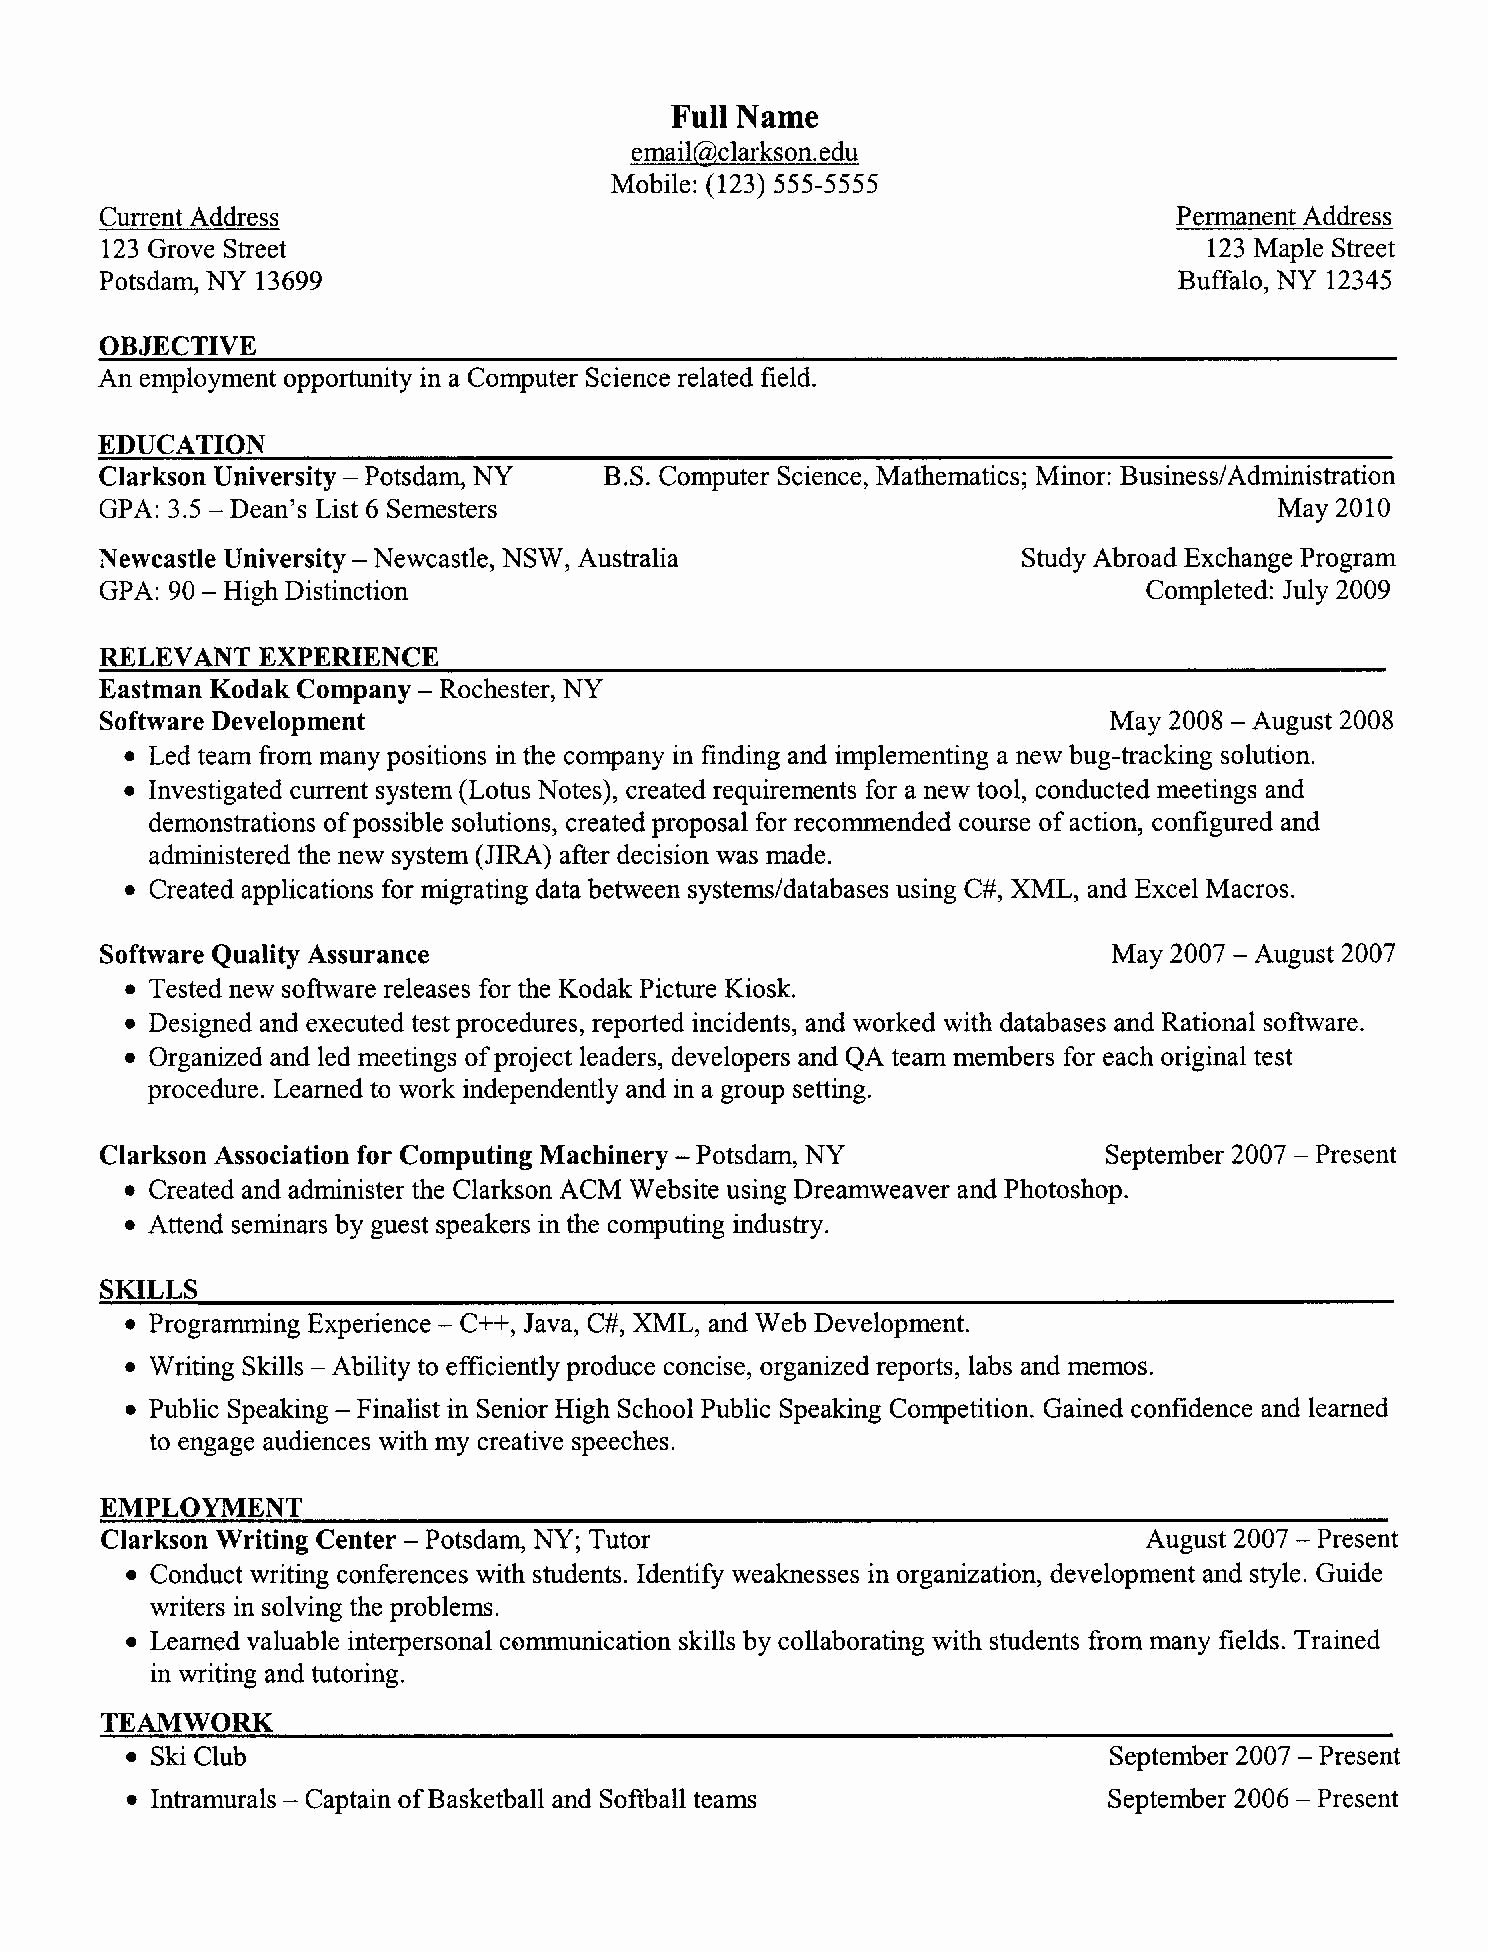 Computer Science Resume Templates Inspirational Skills that You Should Not Include On Resume